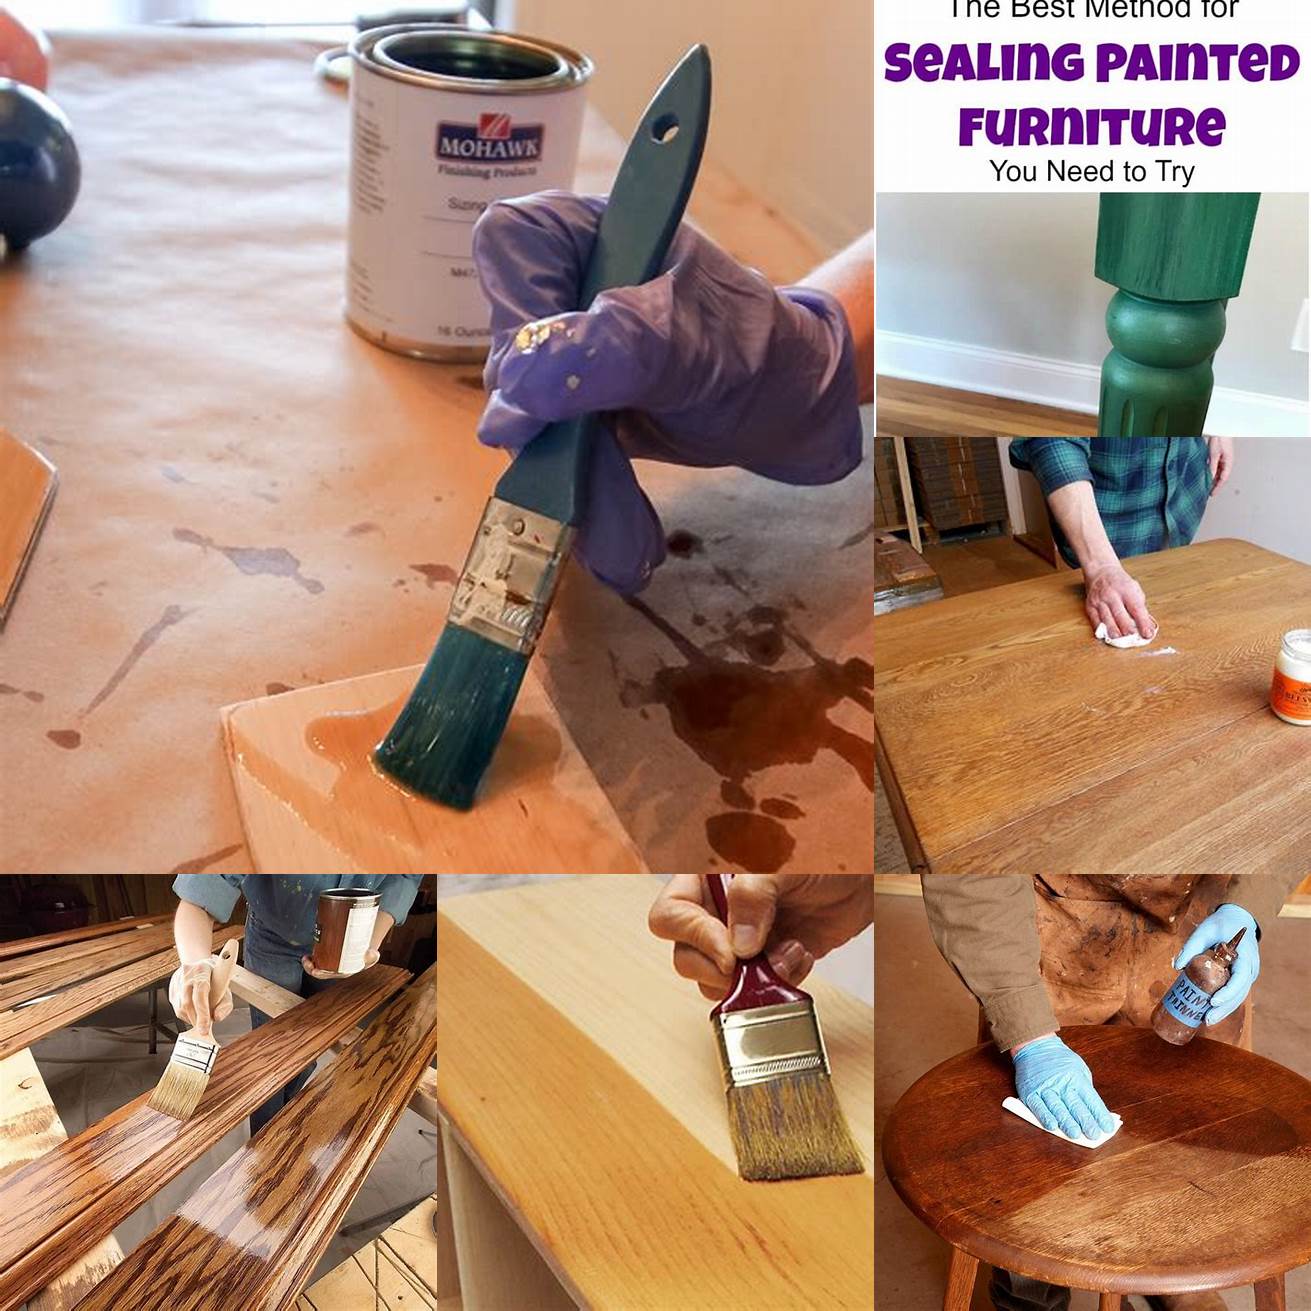 Apply a Sealant or Finish to the Furniture